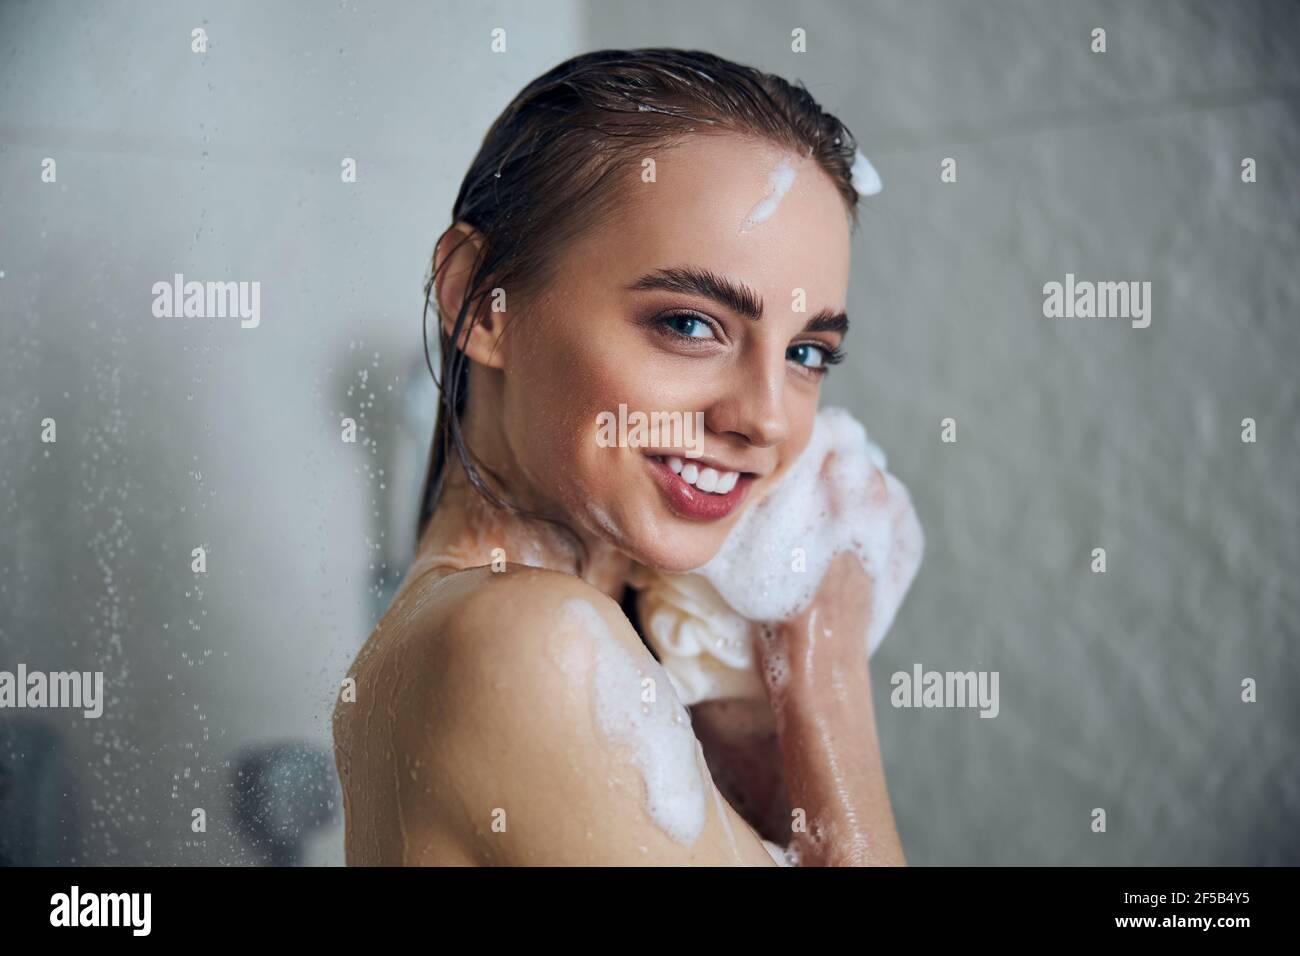 rubbing herself with a washing cloth in the shower and lot of foam